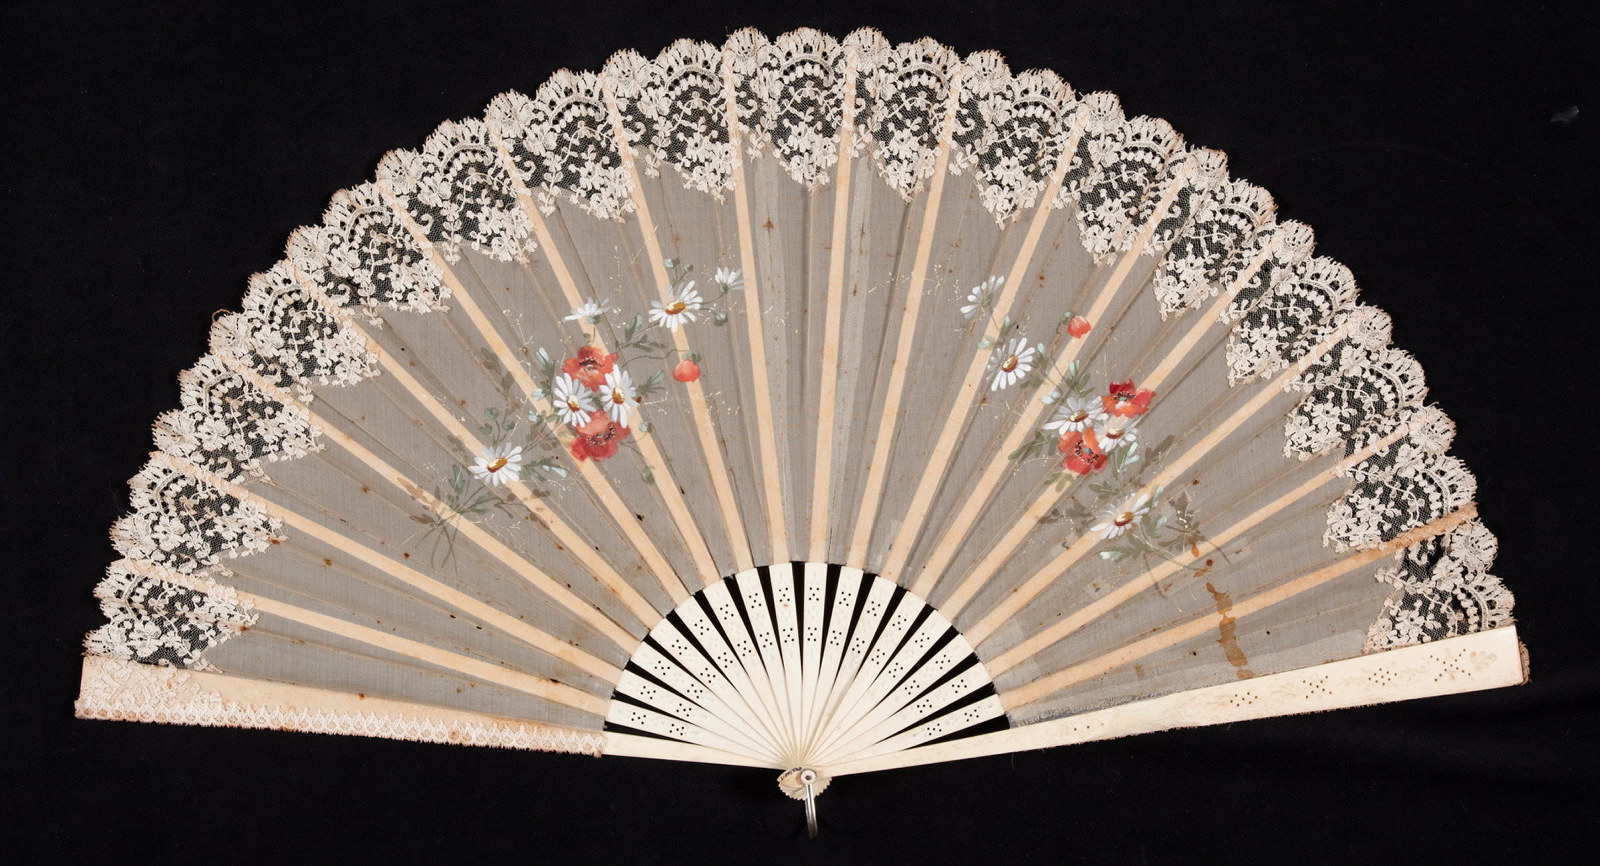 Pleated concertina fan. Lace and netting with painted decoration and ivory sticks. Late 19th century.